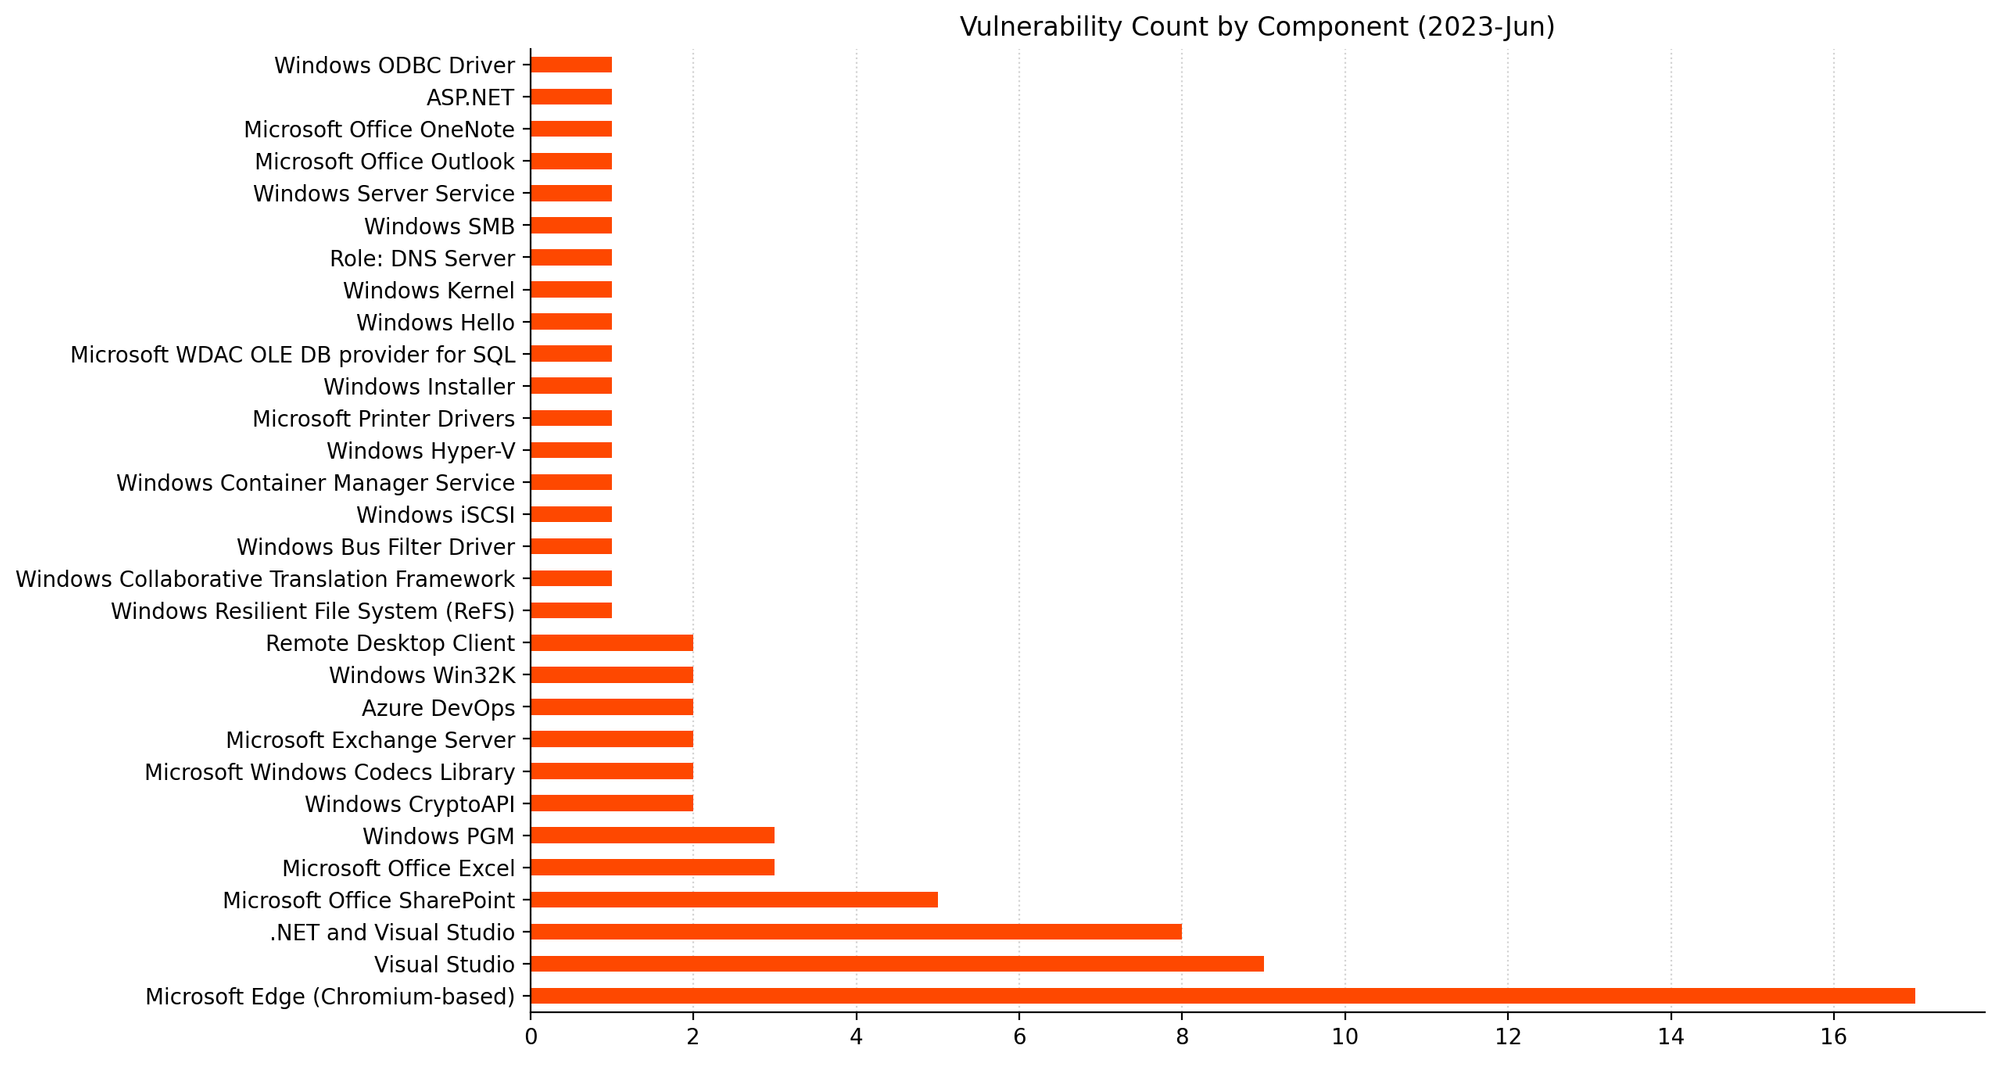 A bar chart showing the distribution of vulnerabilities by affected component for Microsoft Patch Tuesday June 2023.